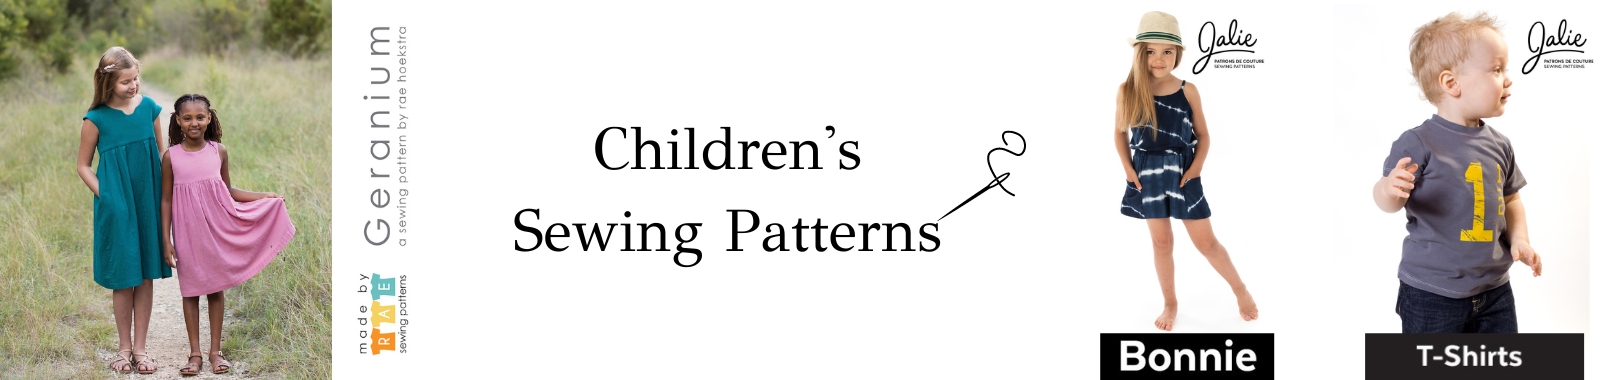 Sewing_For_Children_Fabric_Essential_Blog_Banner_Patterns